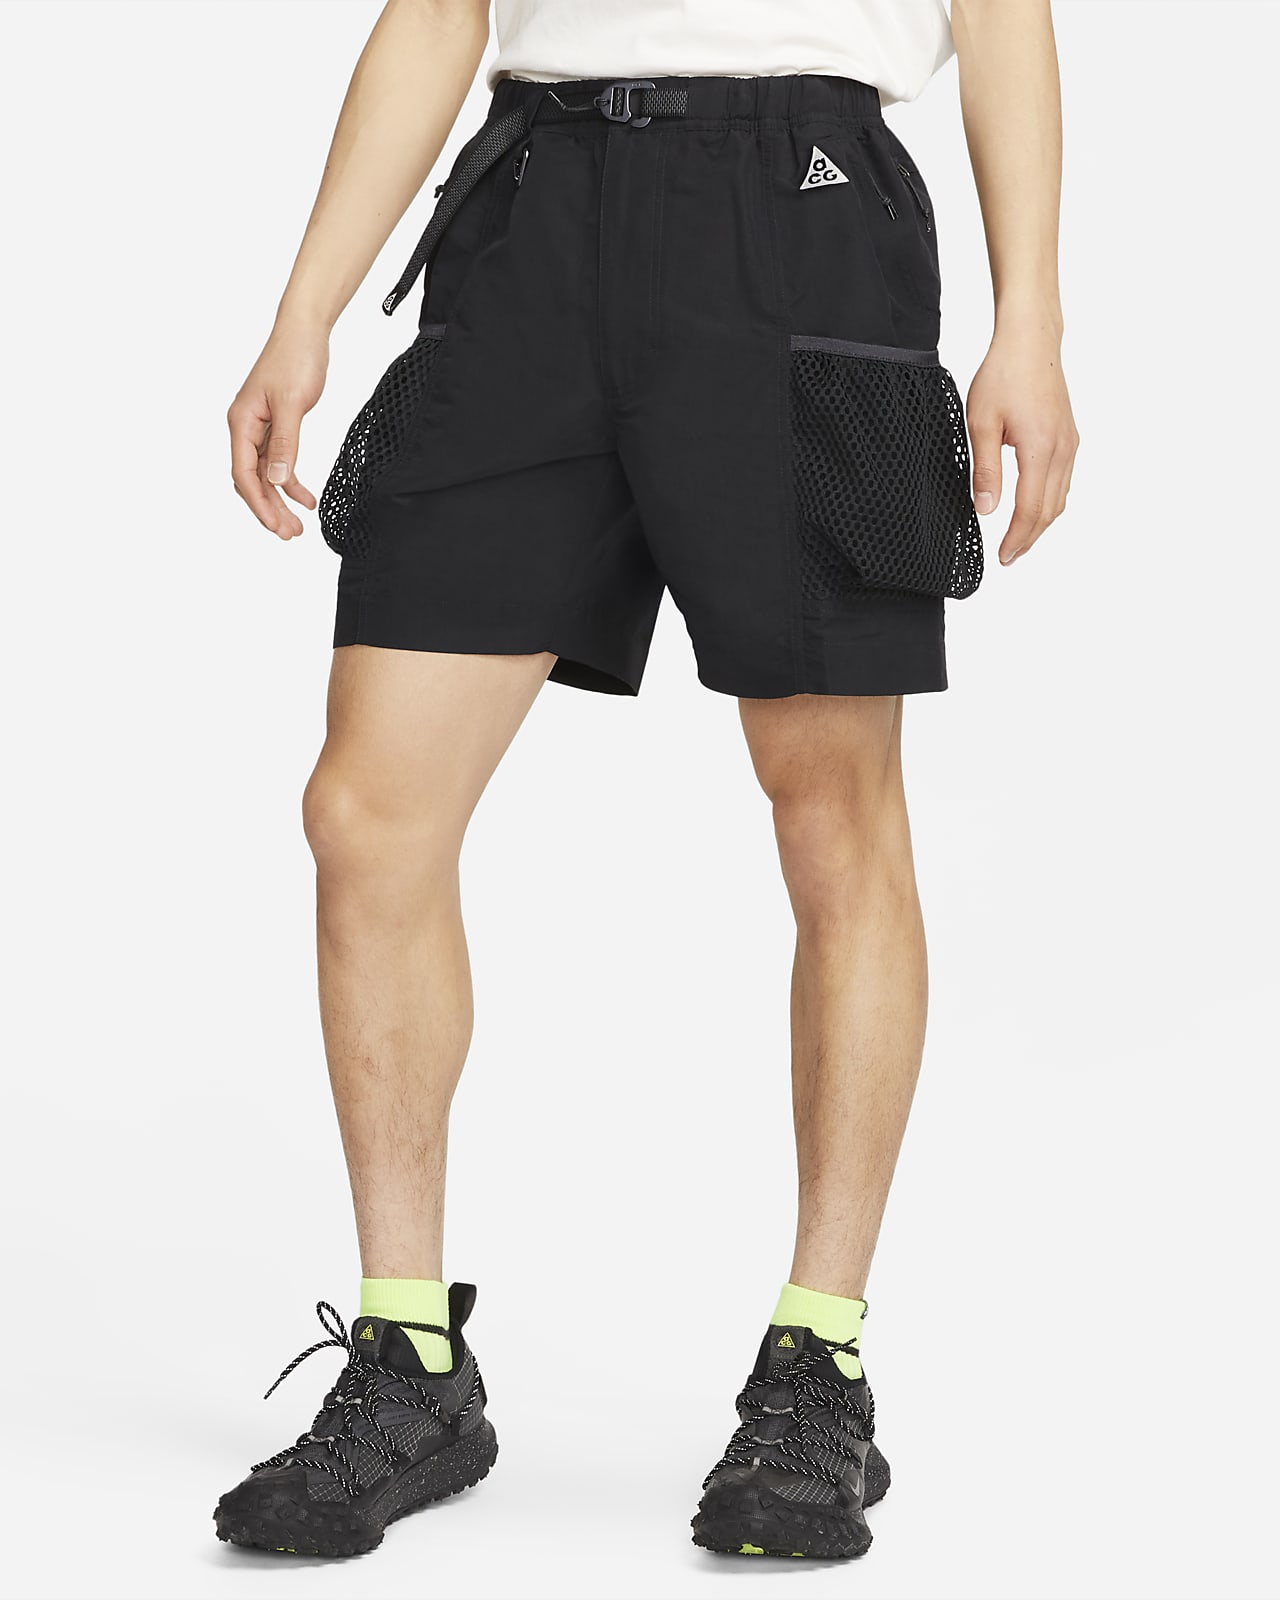 Is it okay to cut off the underwear on my running shorts? - Quora